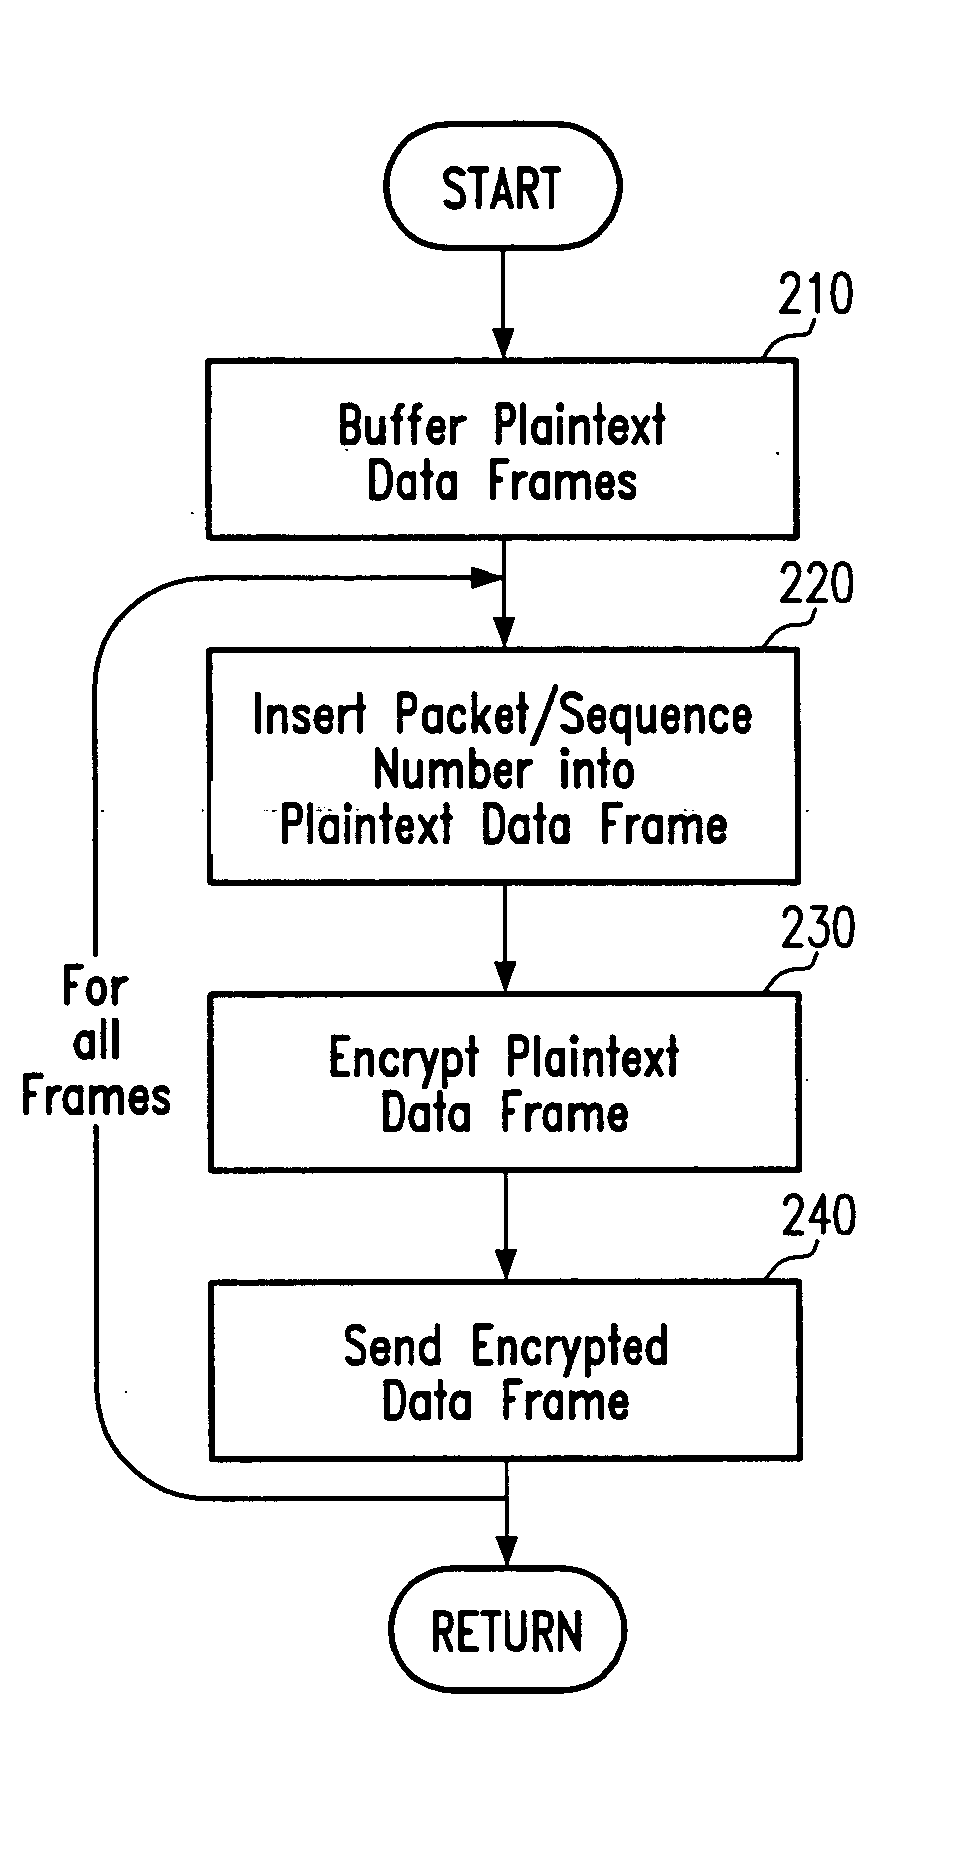 On-the-fly encryption/decryption for WLAN communications